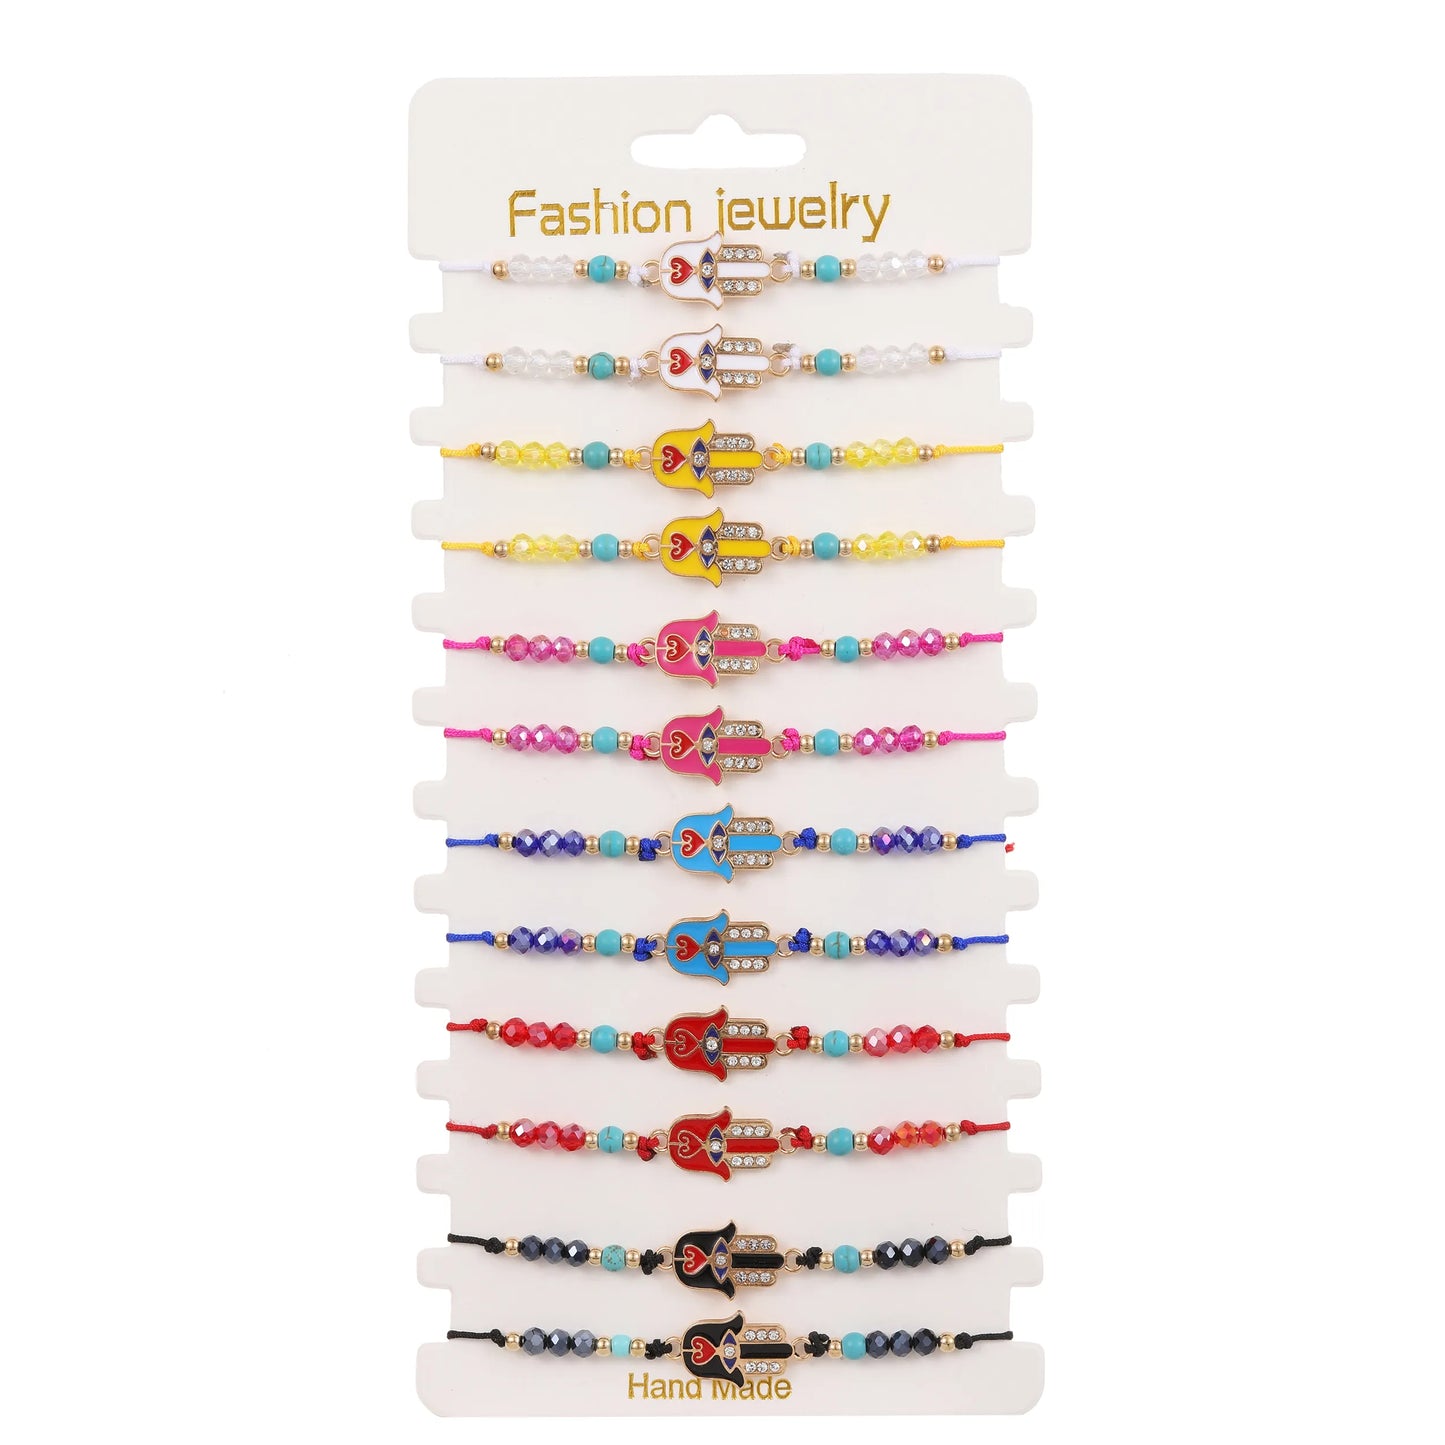 12pcs Colorful Crystal Beads Bracelet Women Braided Adjustable Rope Chain Fatima Hand Summer Anklet Jewelry Foot Leg Chain